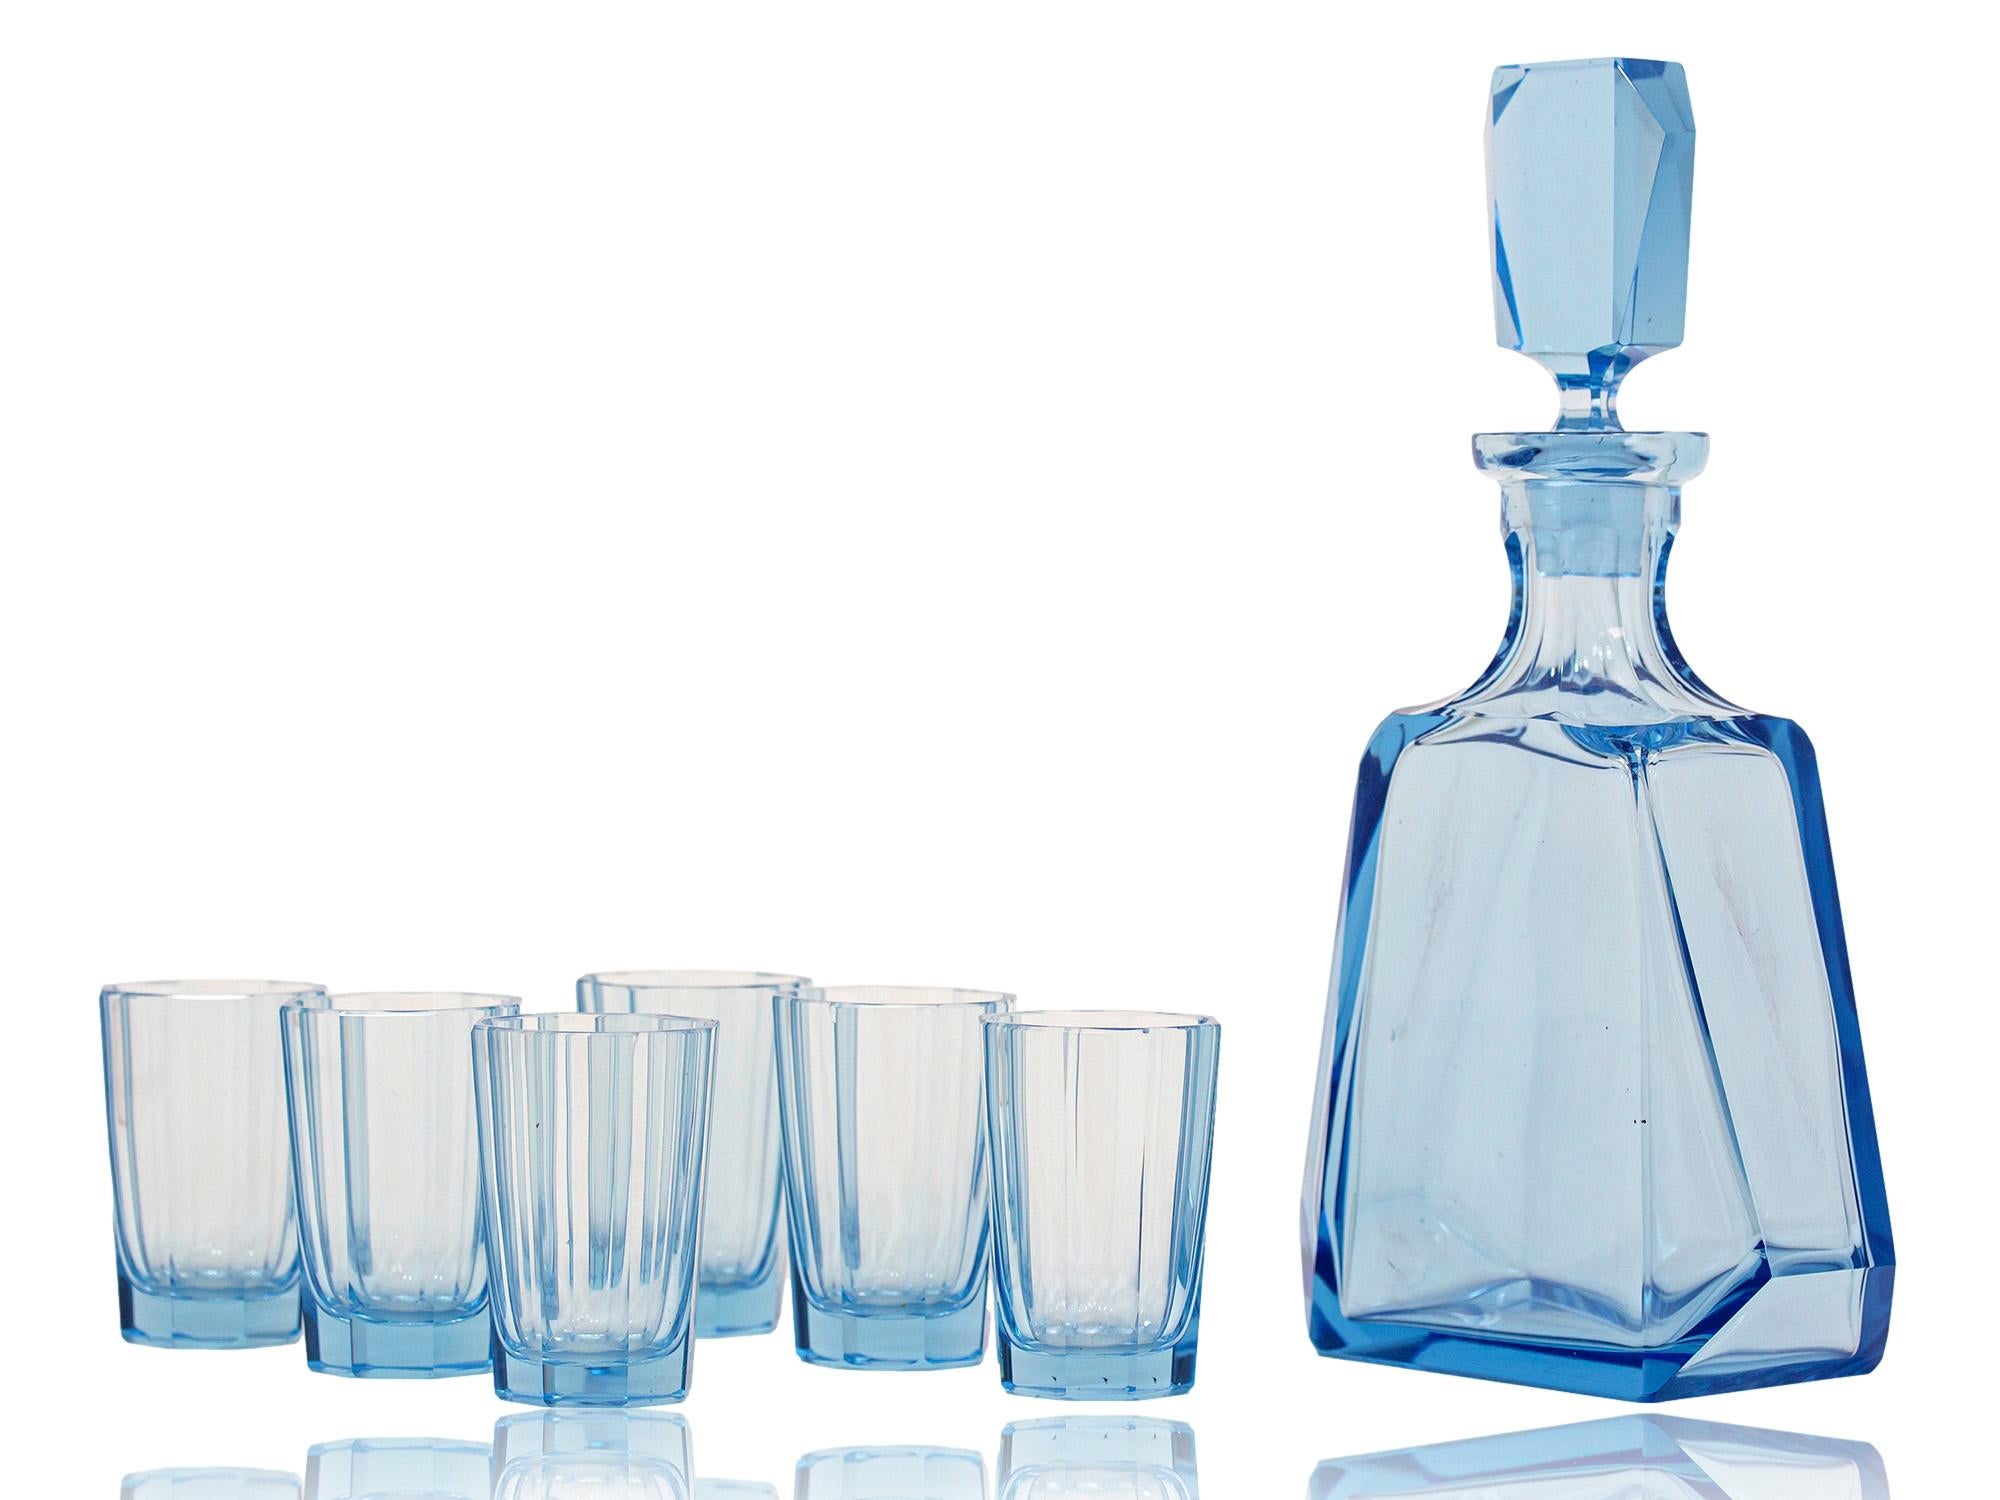 Complete with six shot Glasses

From our Barware collection, we are delighted to offer this Art Deco Decanter Set. The set is beautifully formed with a vibrant blue base colour having faceted sides to all pieces. The Decanter of abstract pyramid